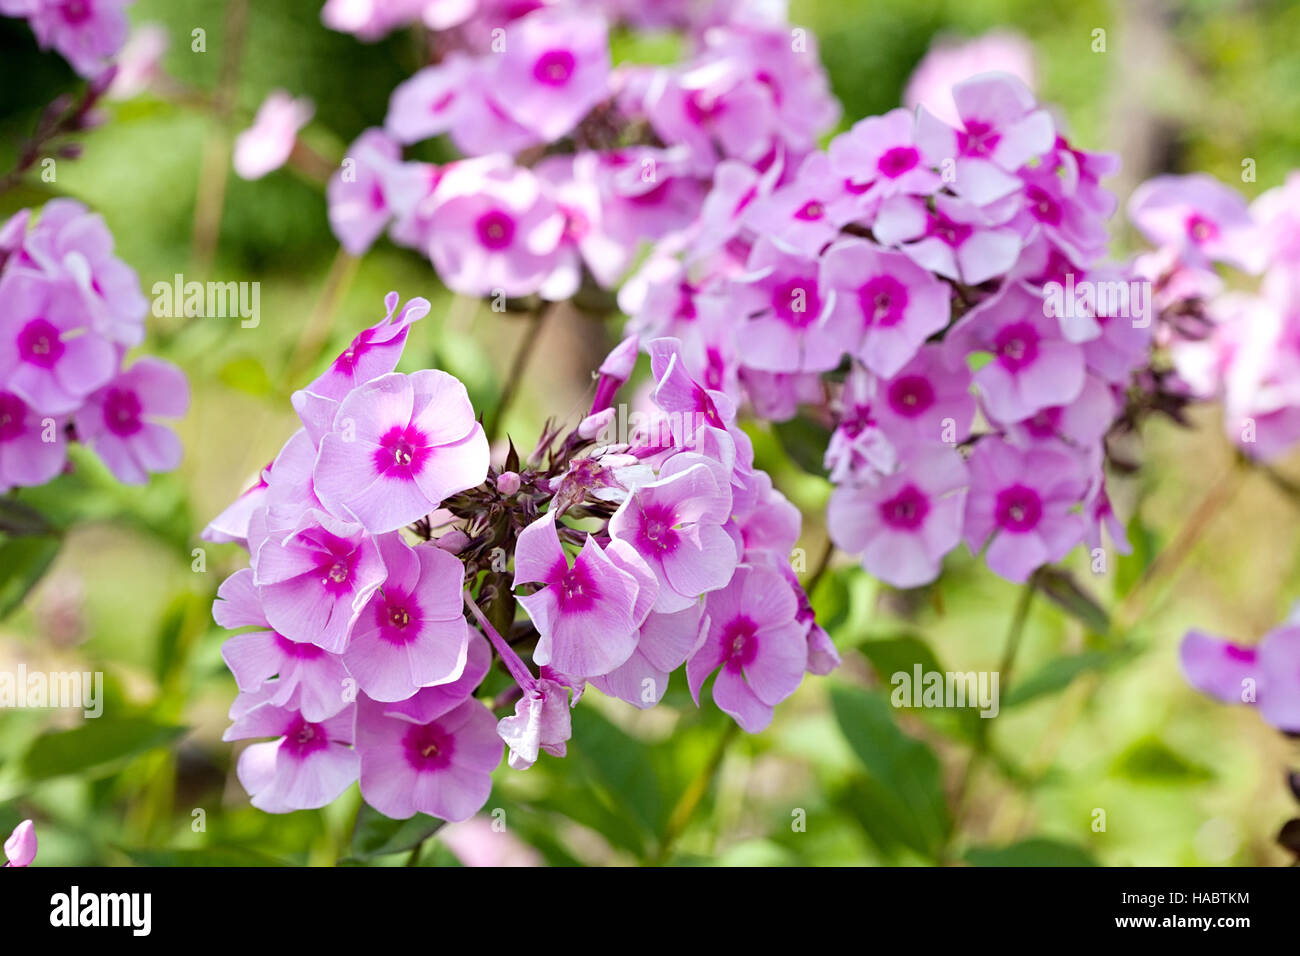 phlox flowers closeup on summer green leaves background Stock Photo